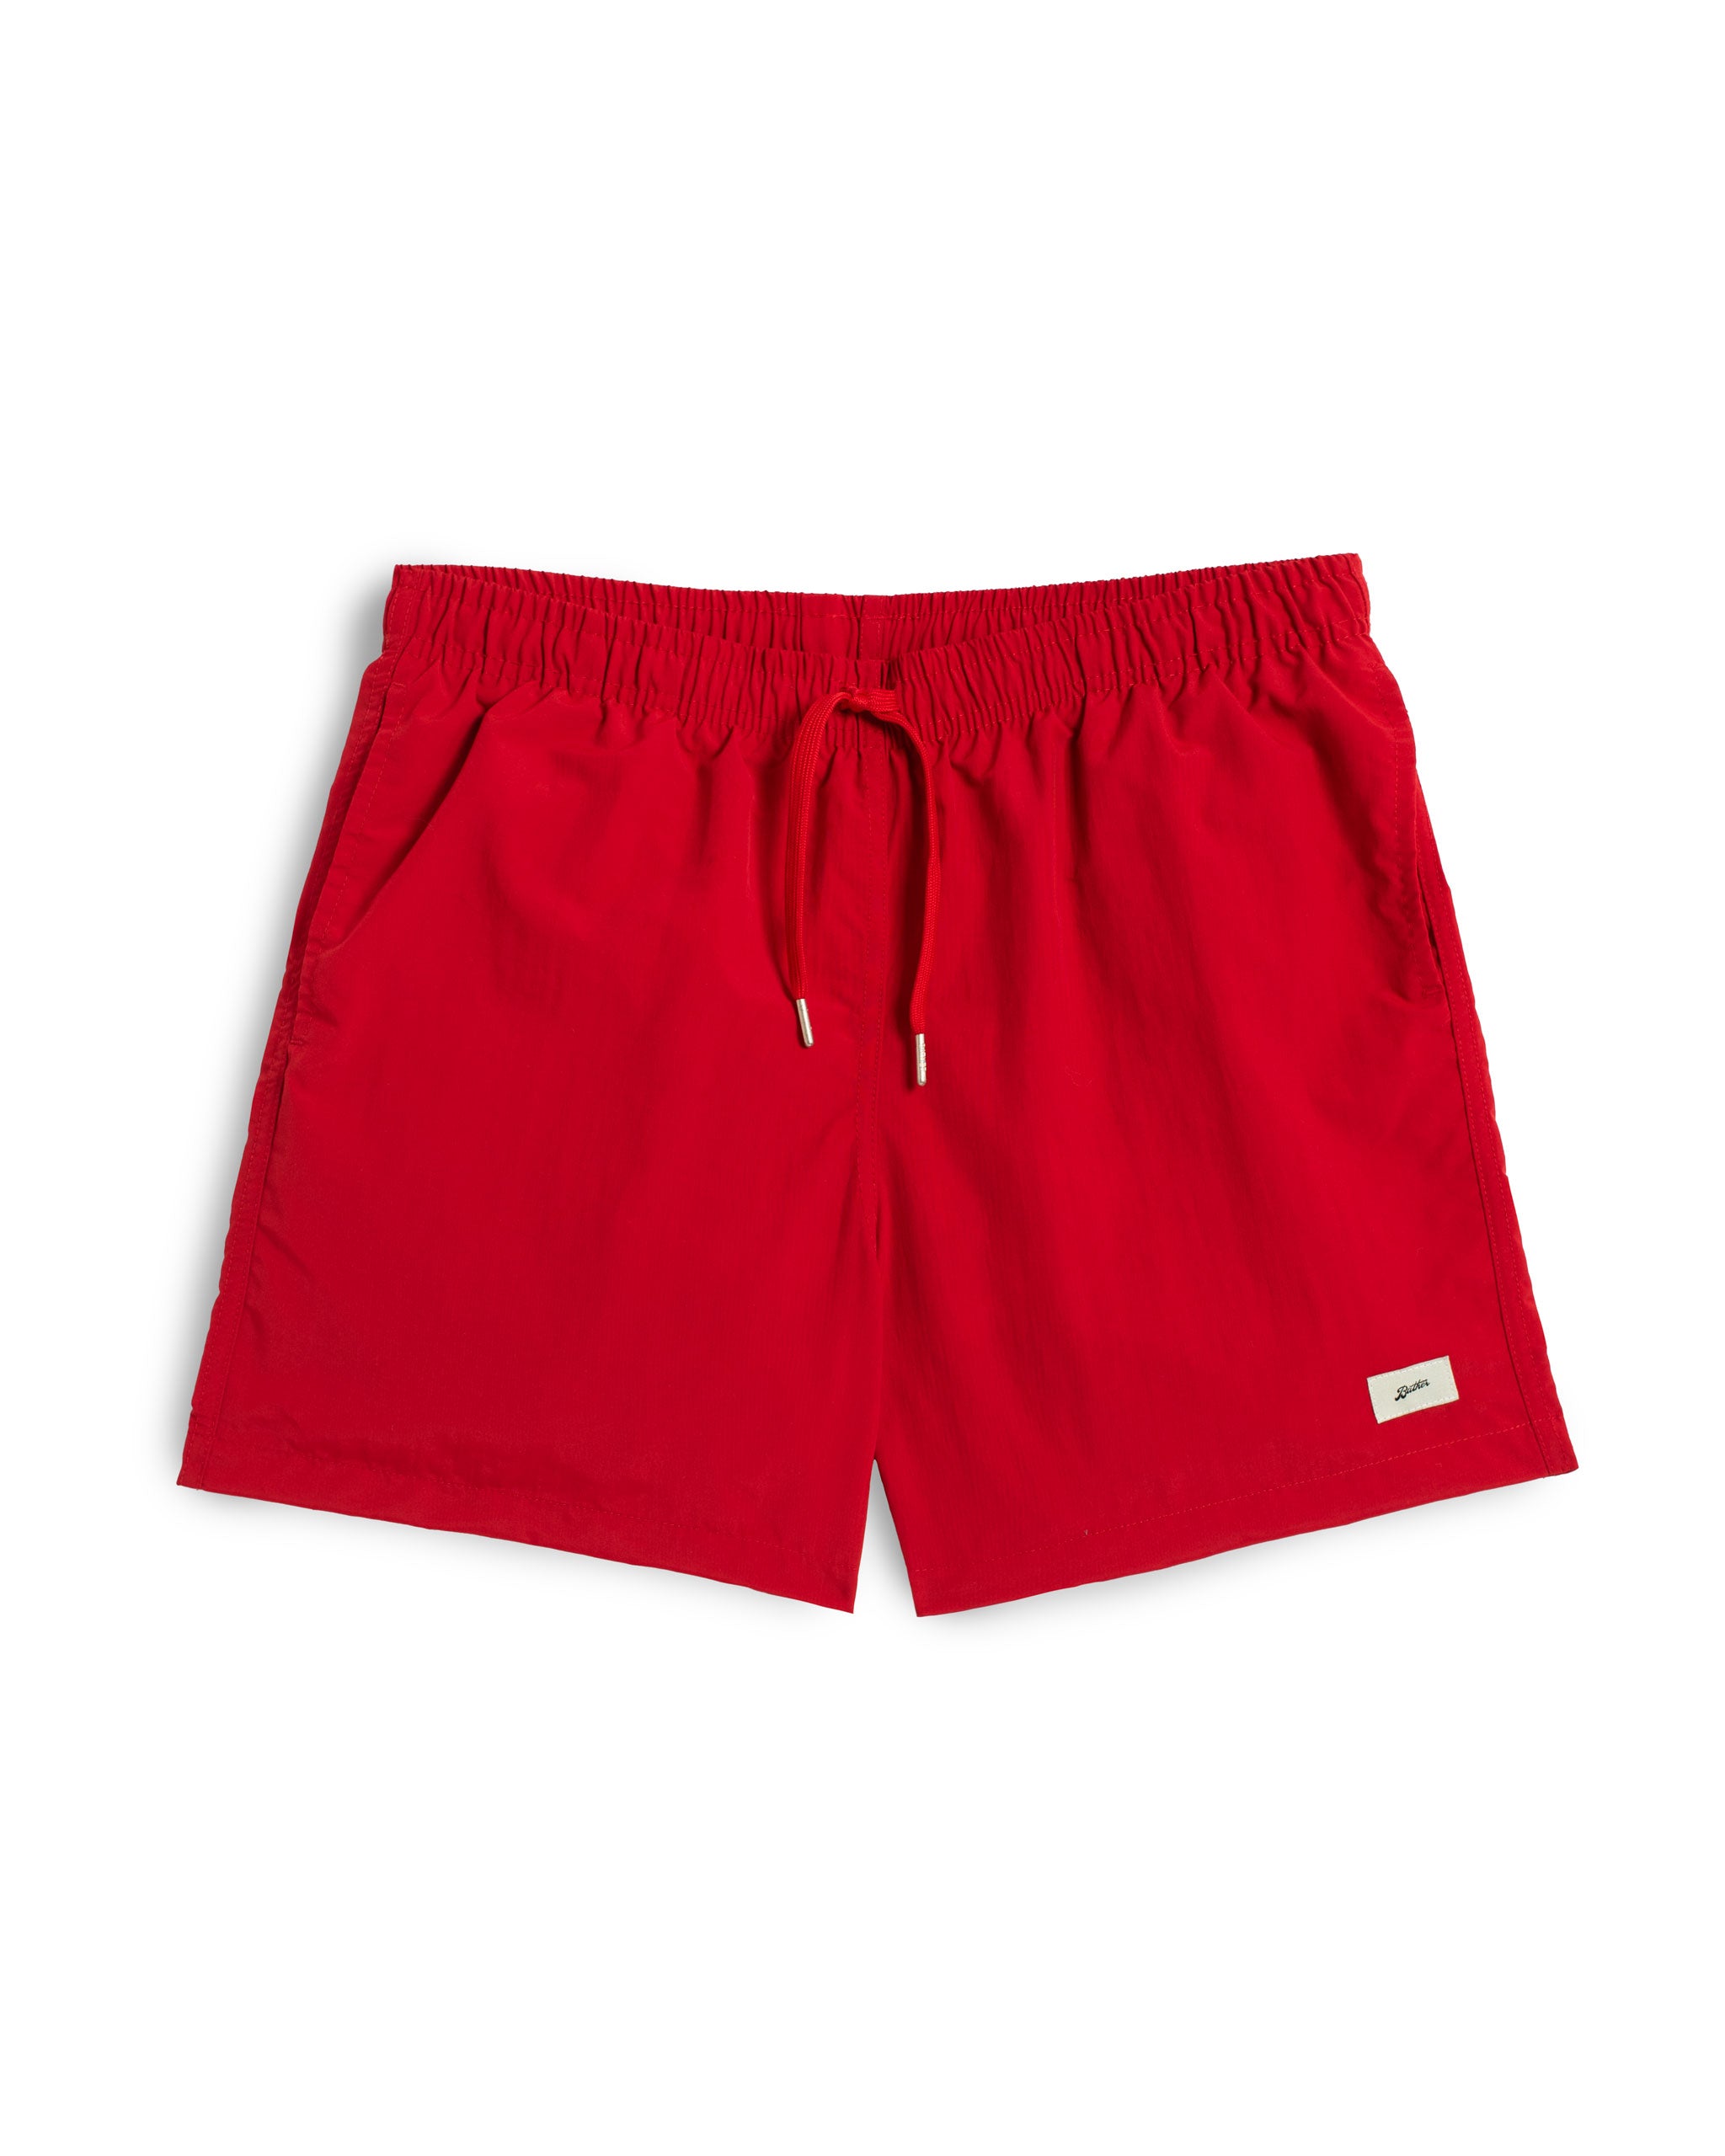 Solid Red Swim Trunk
